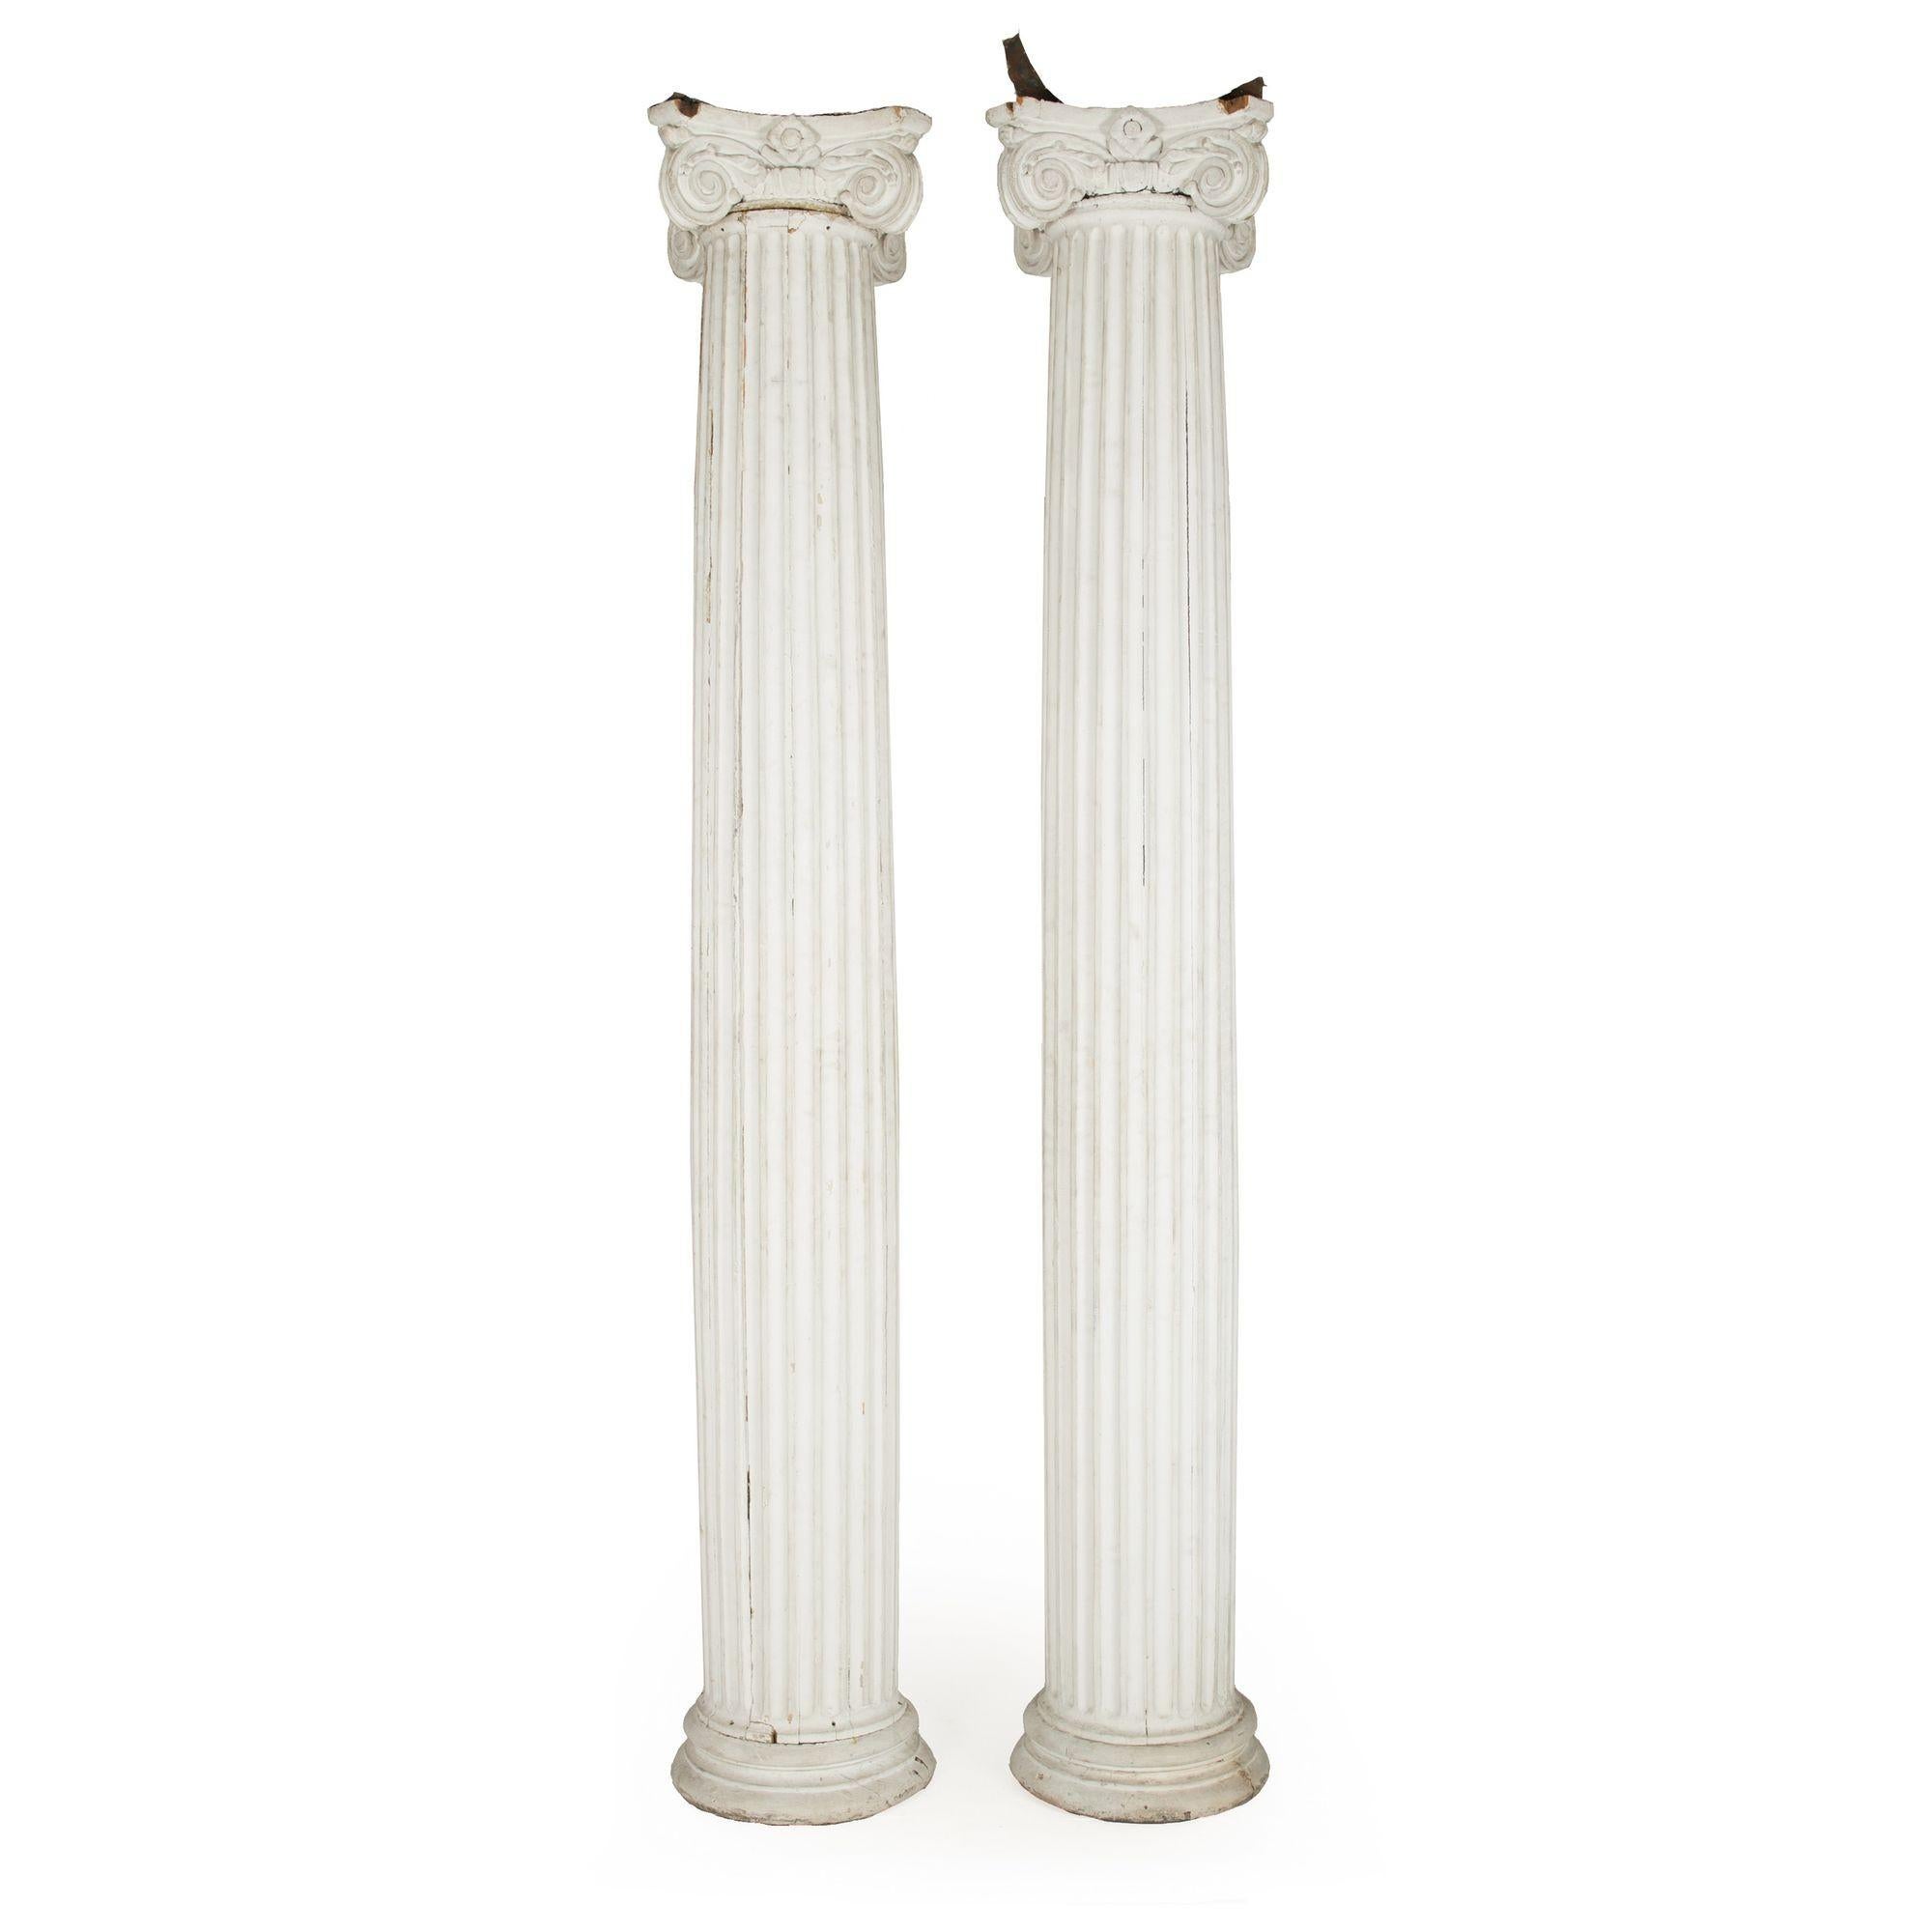 Neoclassical 19th Century Pair of Painted Wood Full-Length Columns w/ Ionic Capitals